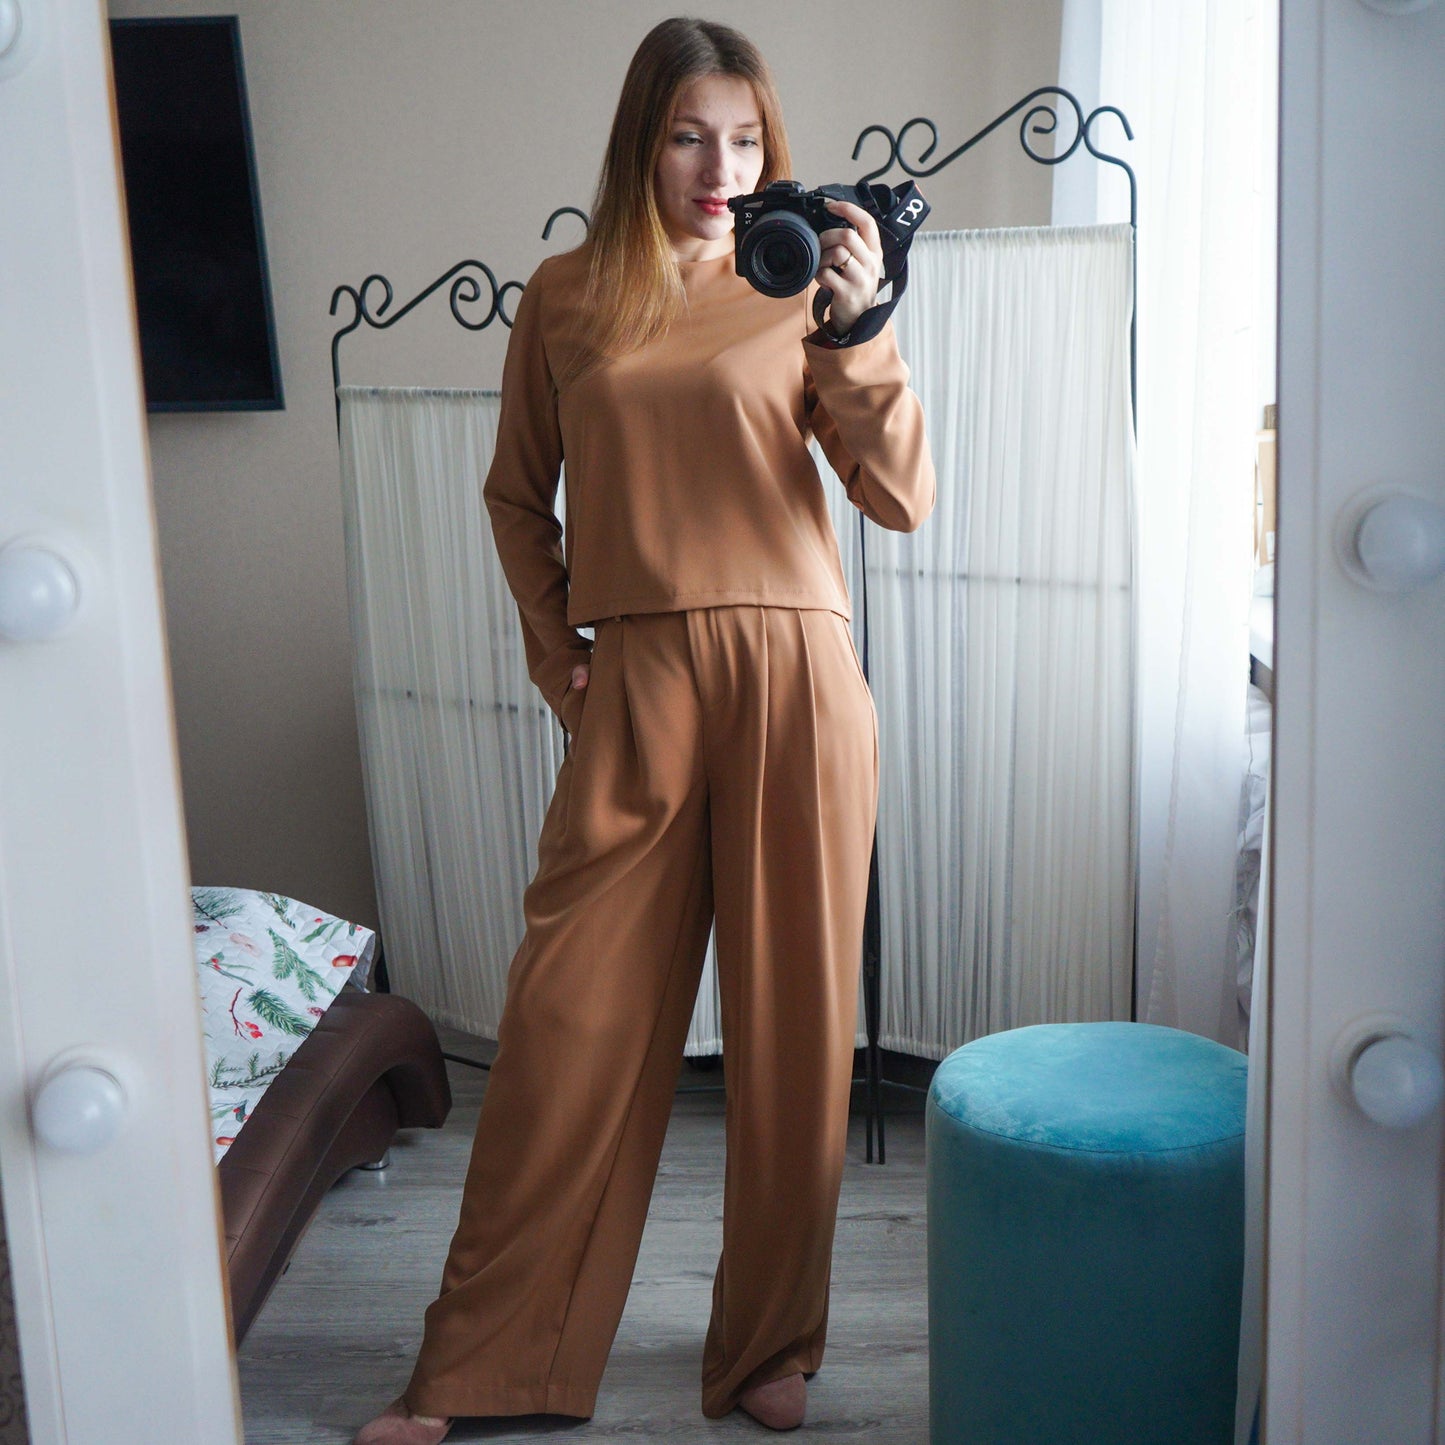 OOTN Vintage Female Palazzo Trousers Classic Wide Leg Pants